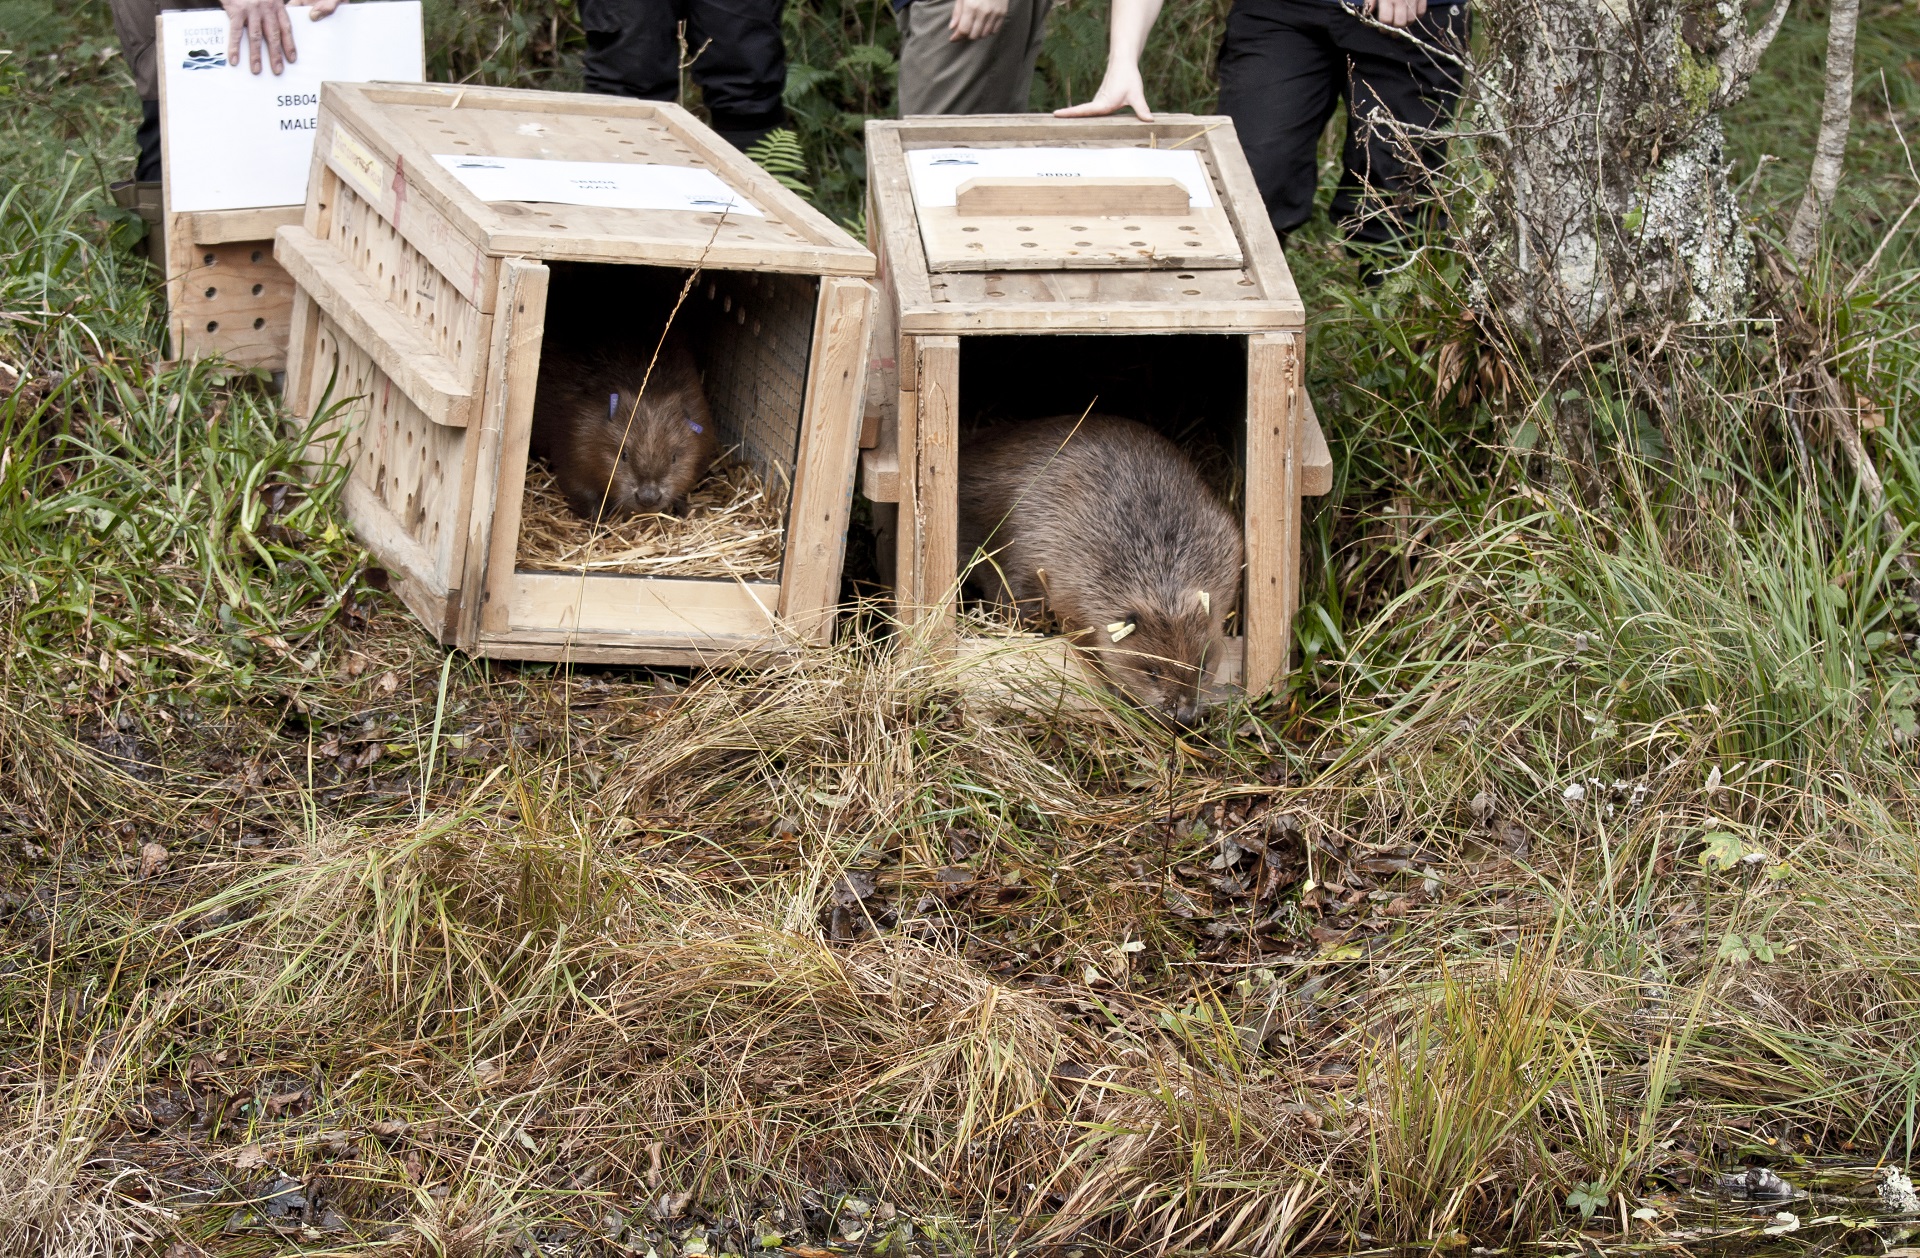 Beavers being released into wild

IMAGE: Scottish Beavers Reinforcement